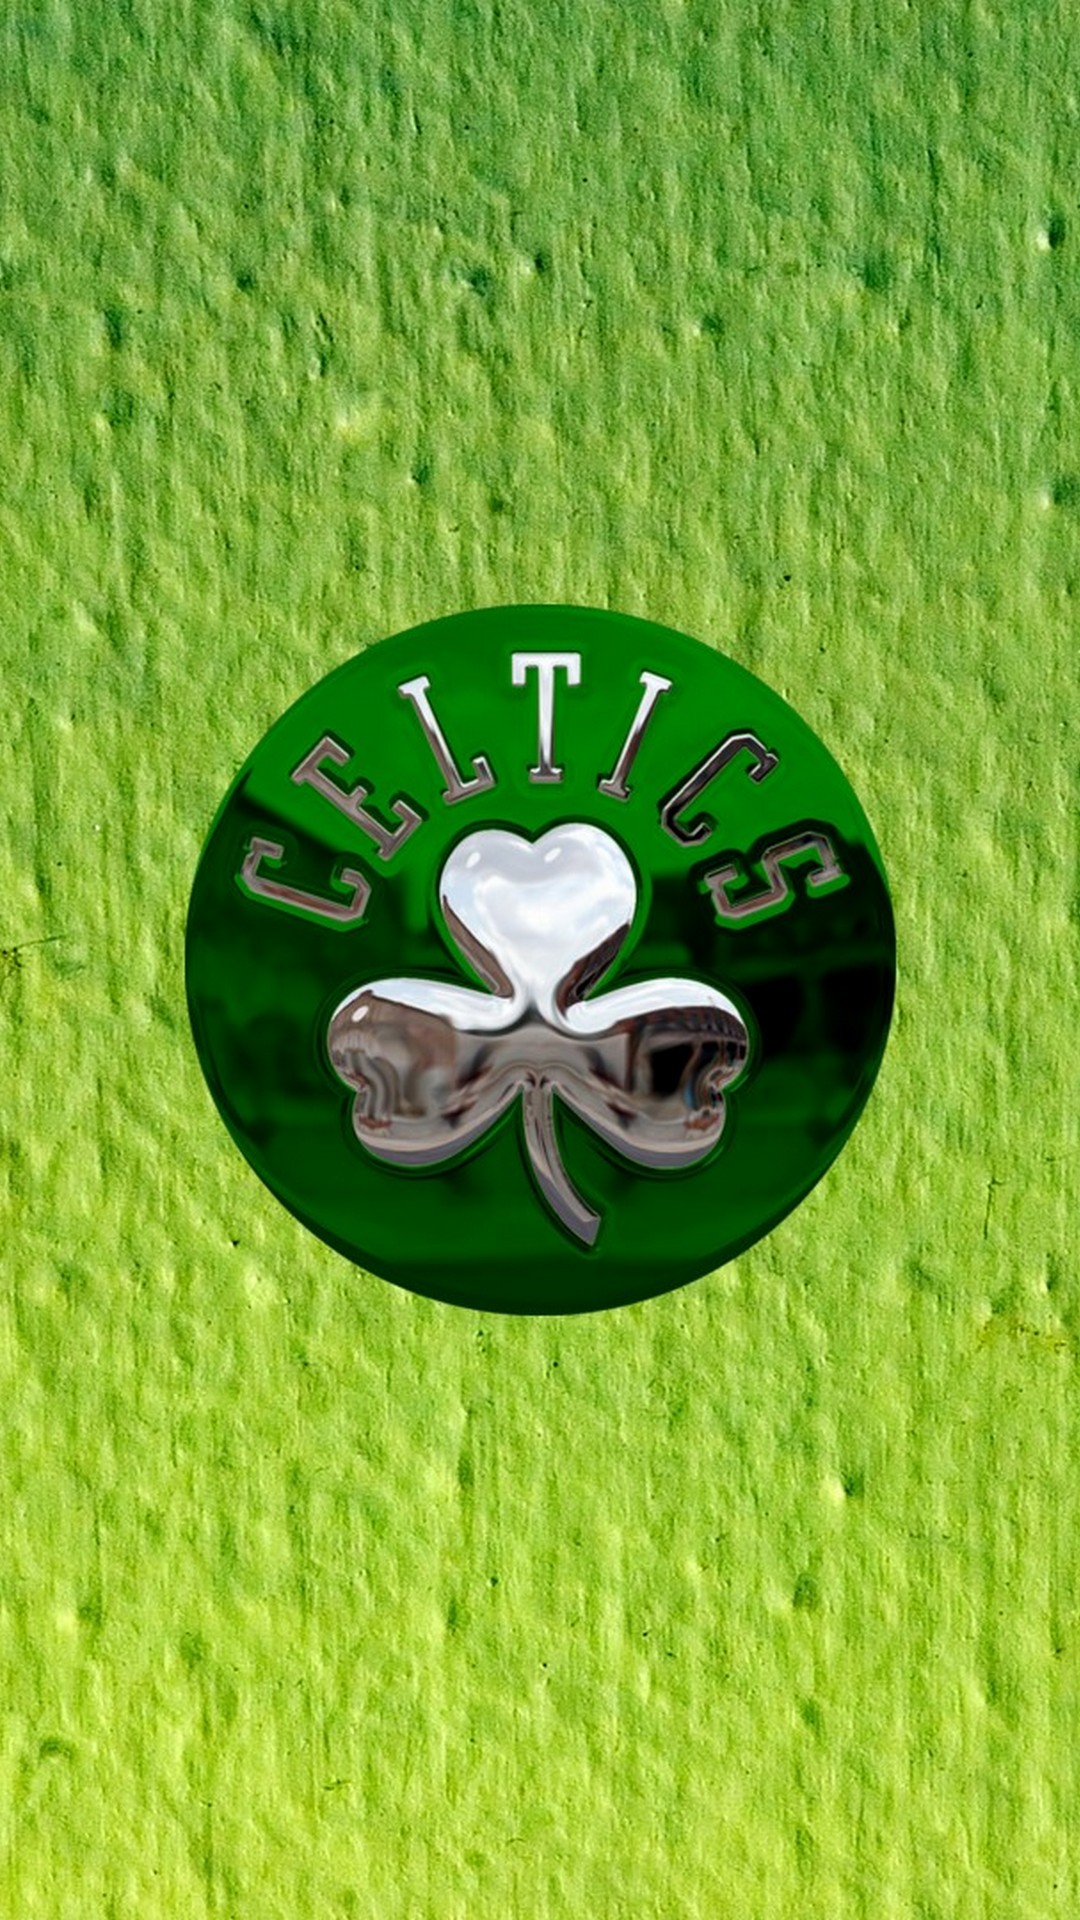 Boston Celtics Wallpaper For Mobile Android with image resolution 1080x1920 pixel. You can make this wallpaper for your Desktop Computer Backgrounds, Mac Wallpapers, Android Lock screen or iPhone Screensavers